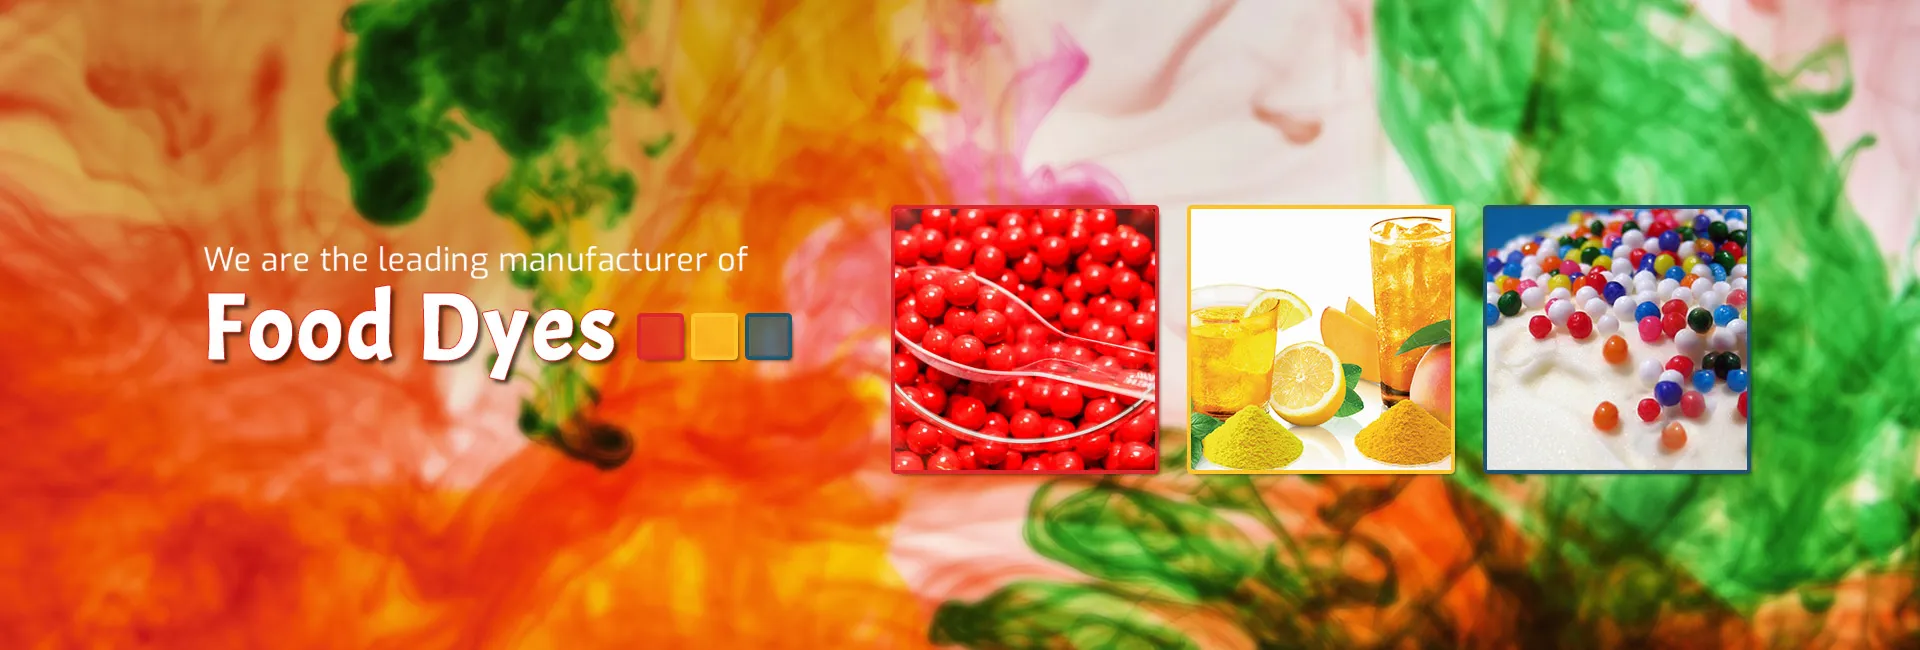 Food Dyes Manufacturer & Suppliers in Bangladesh